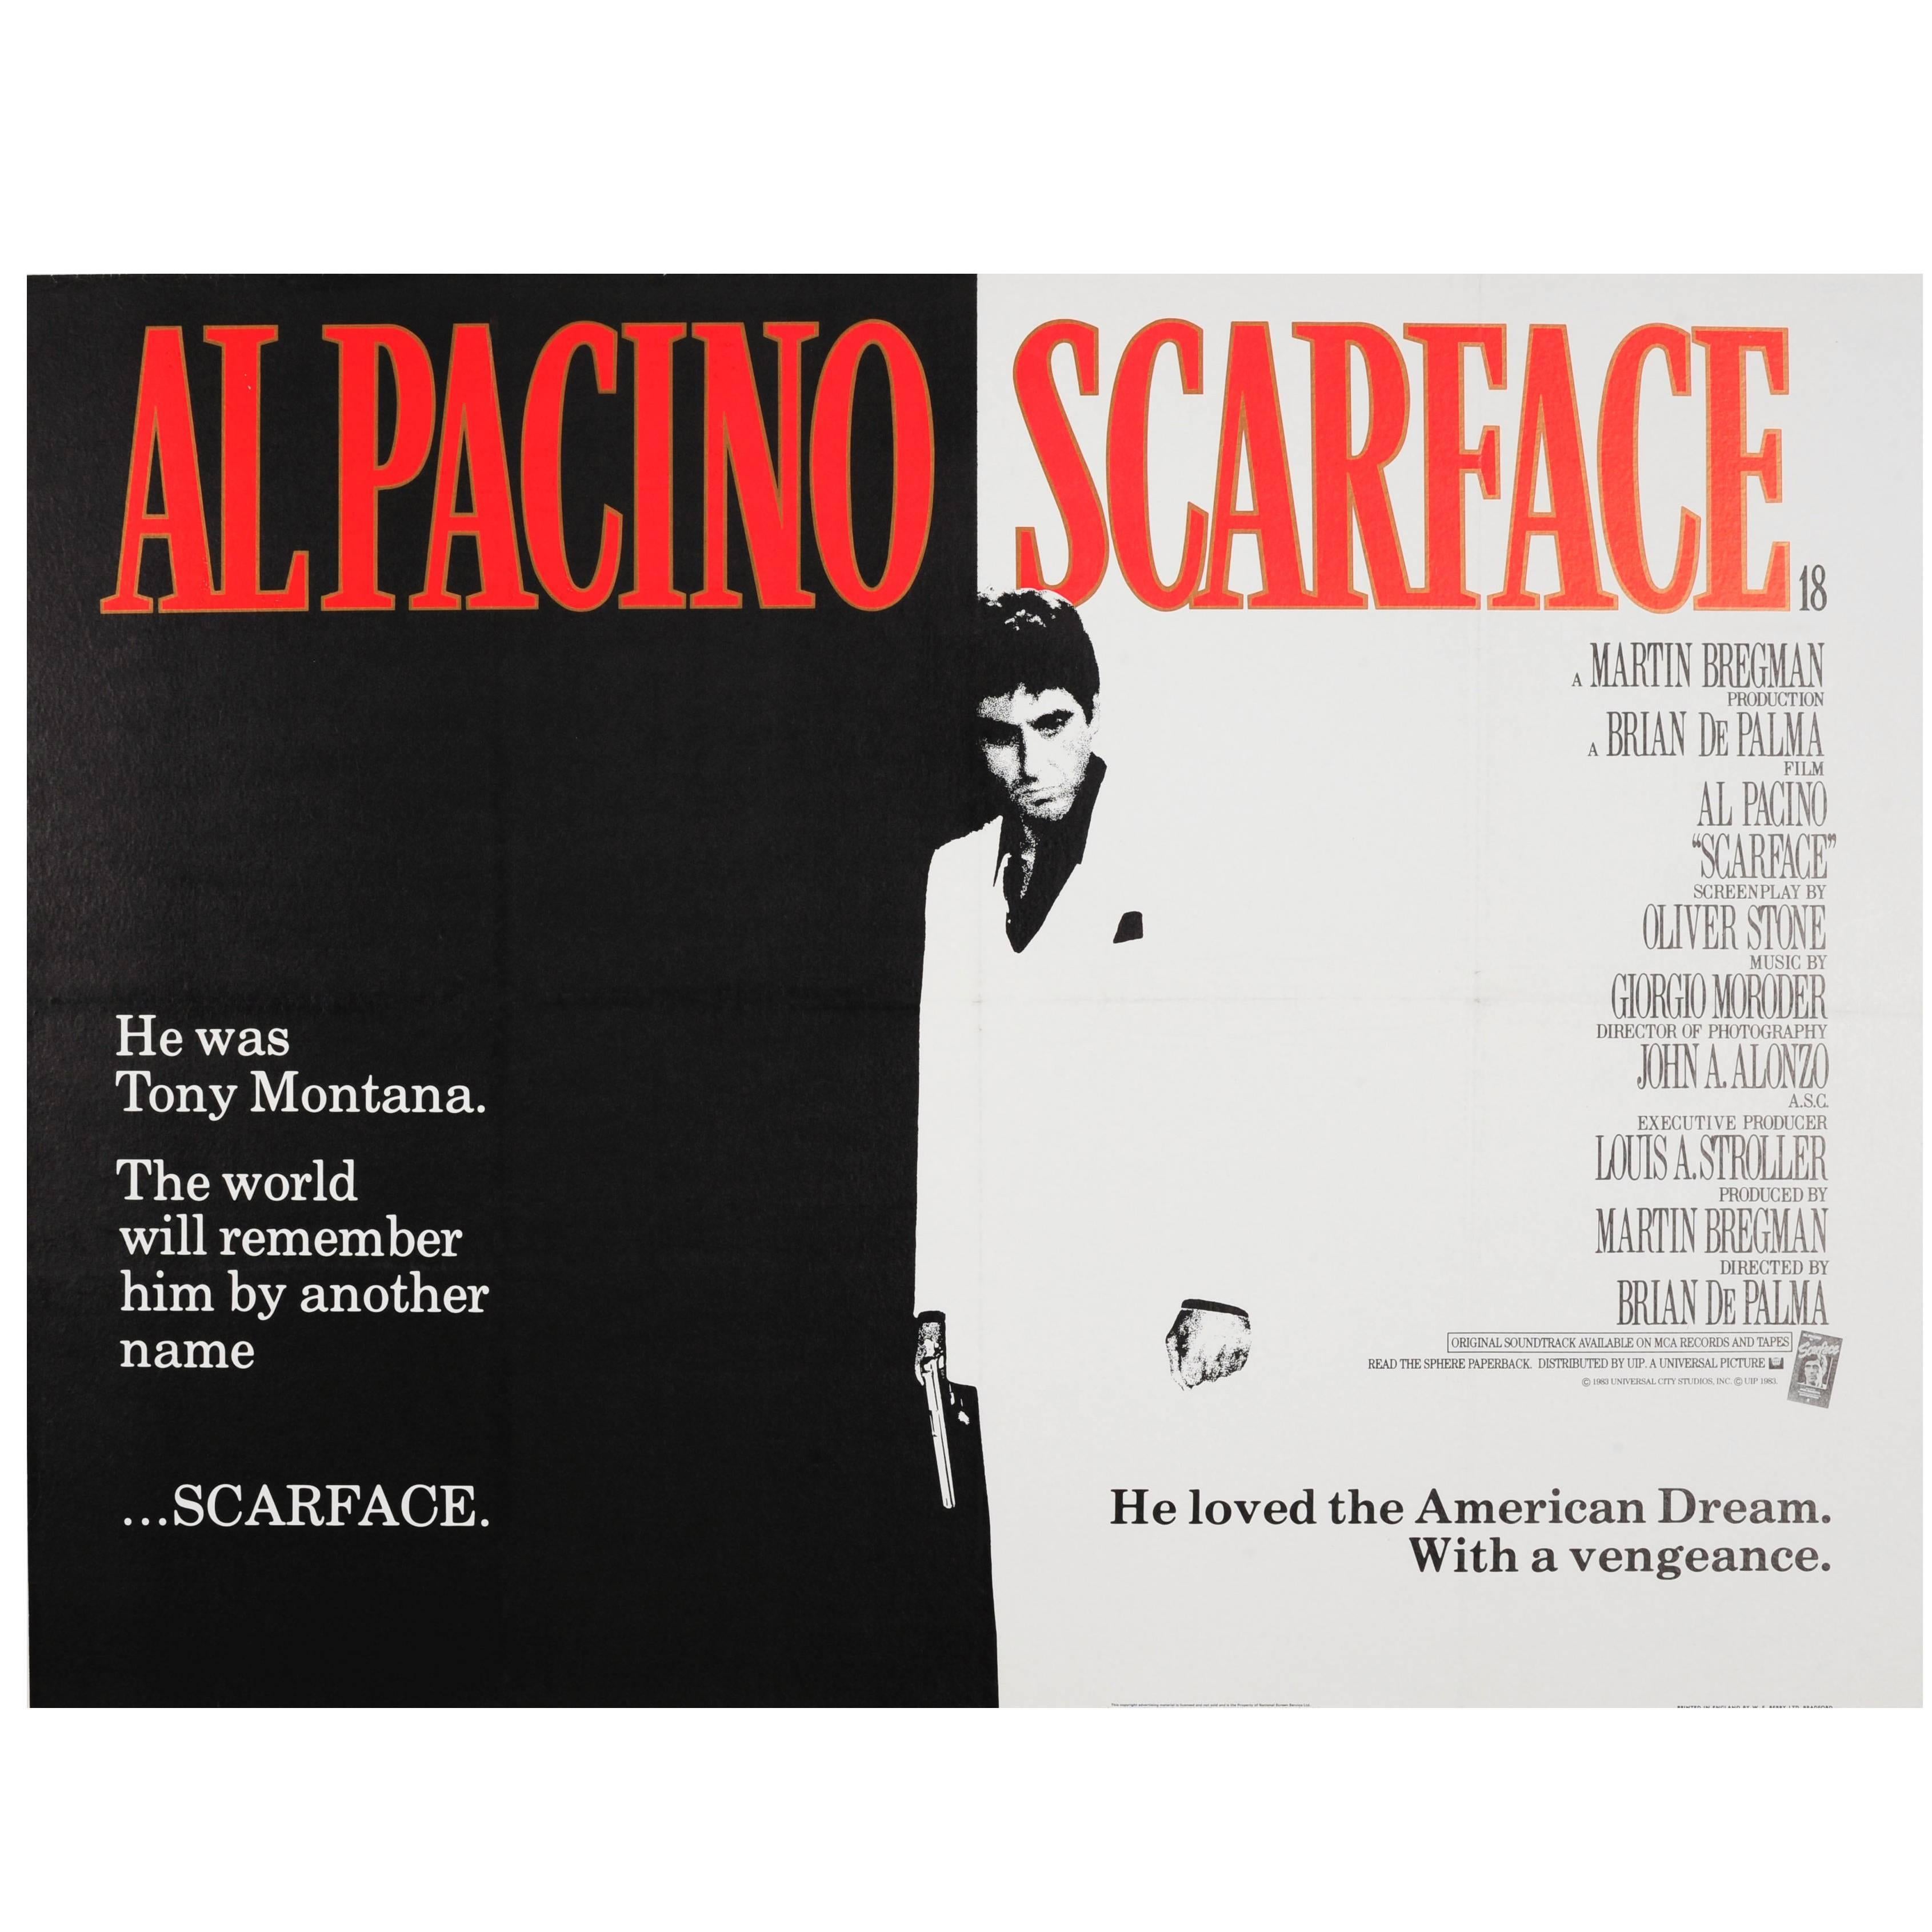 Original Vintage Movie Poster for the Cult Film Starring Al Pacino -  Scarface For Sale at 1stDibs